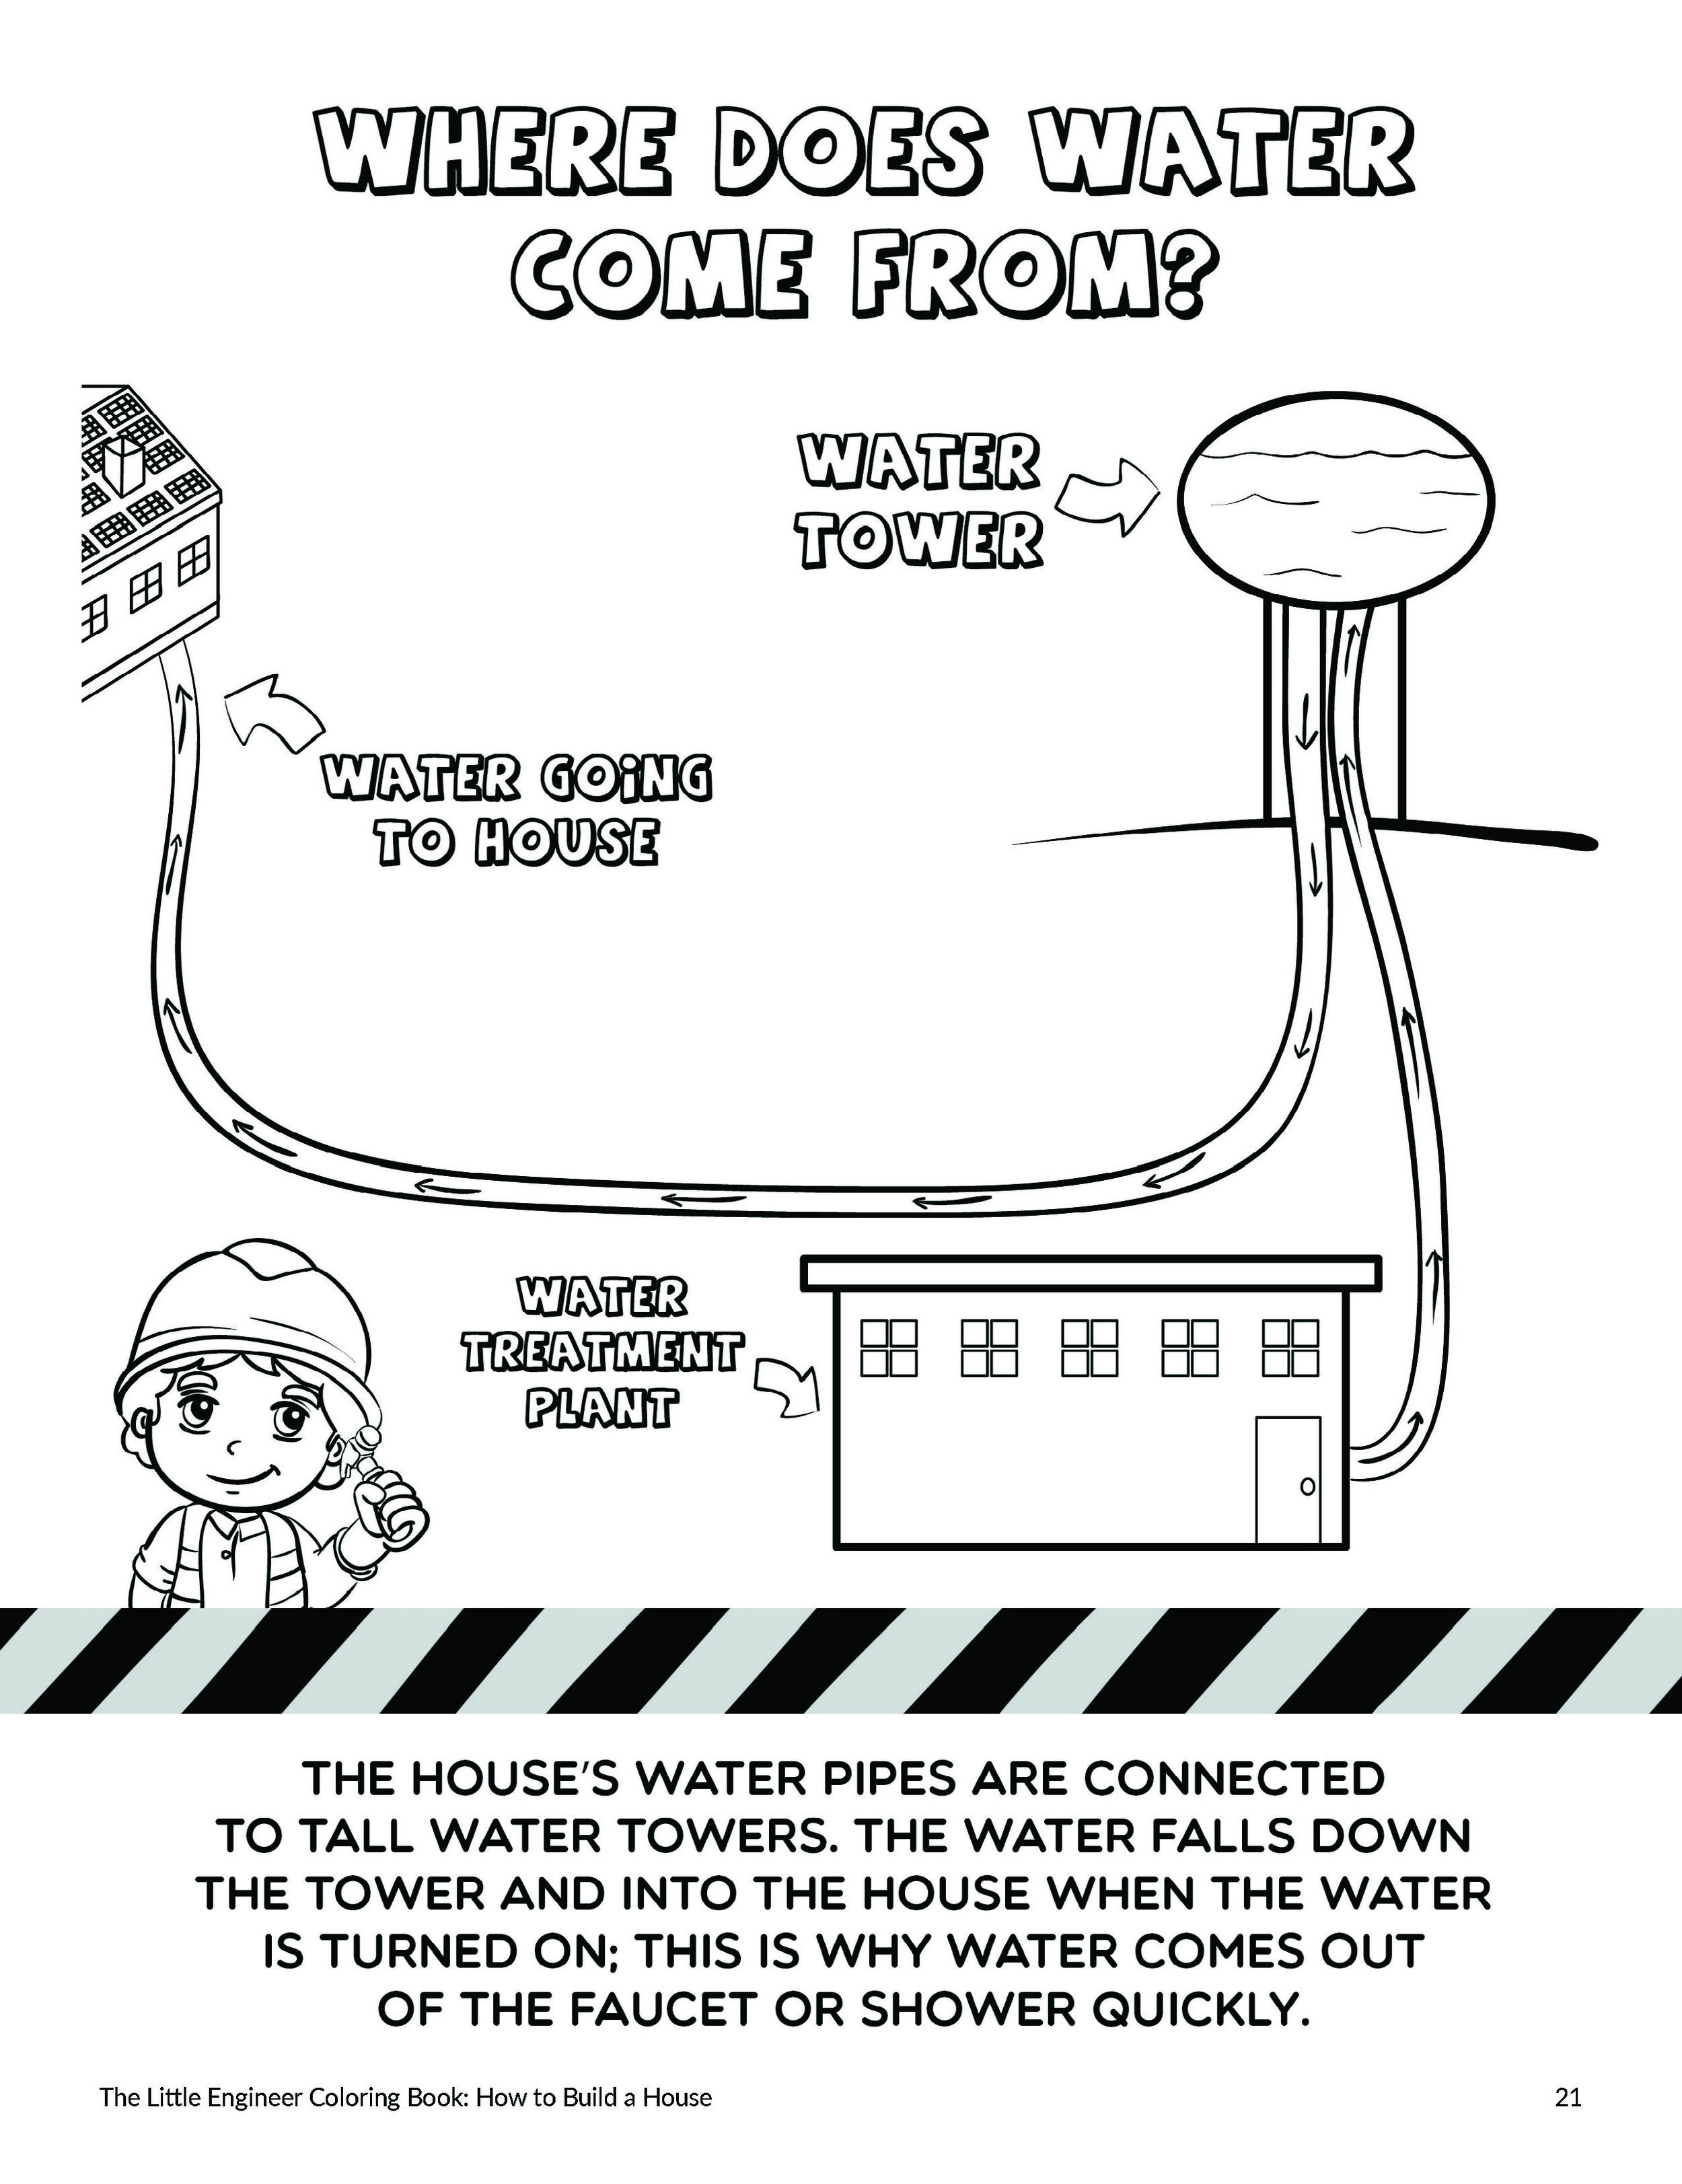 The Little Engineer Coloring Book - House_Page_30.jpg